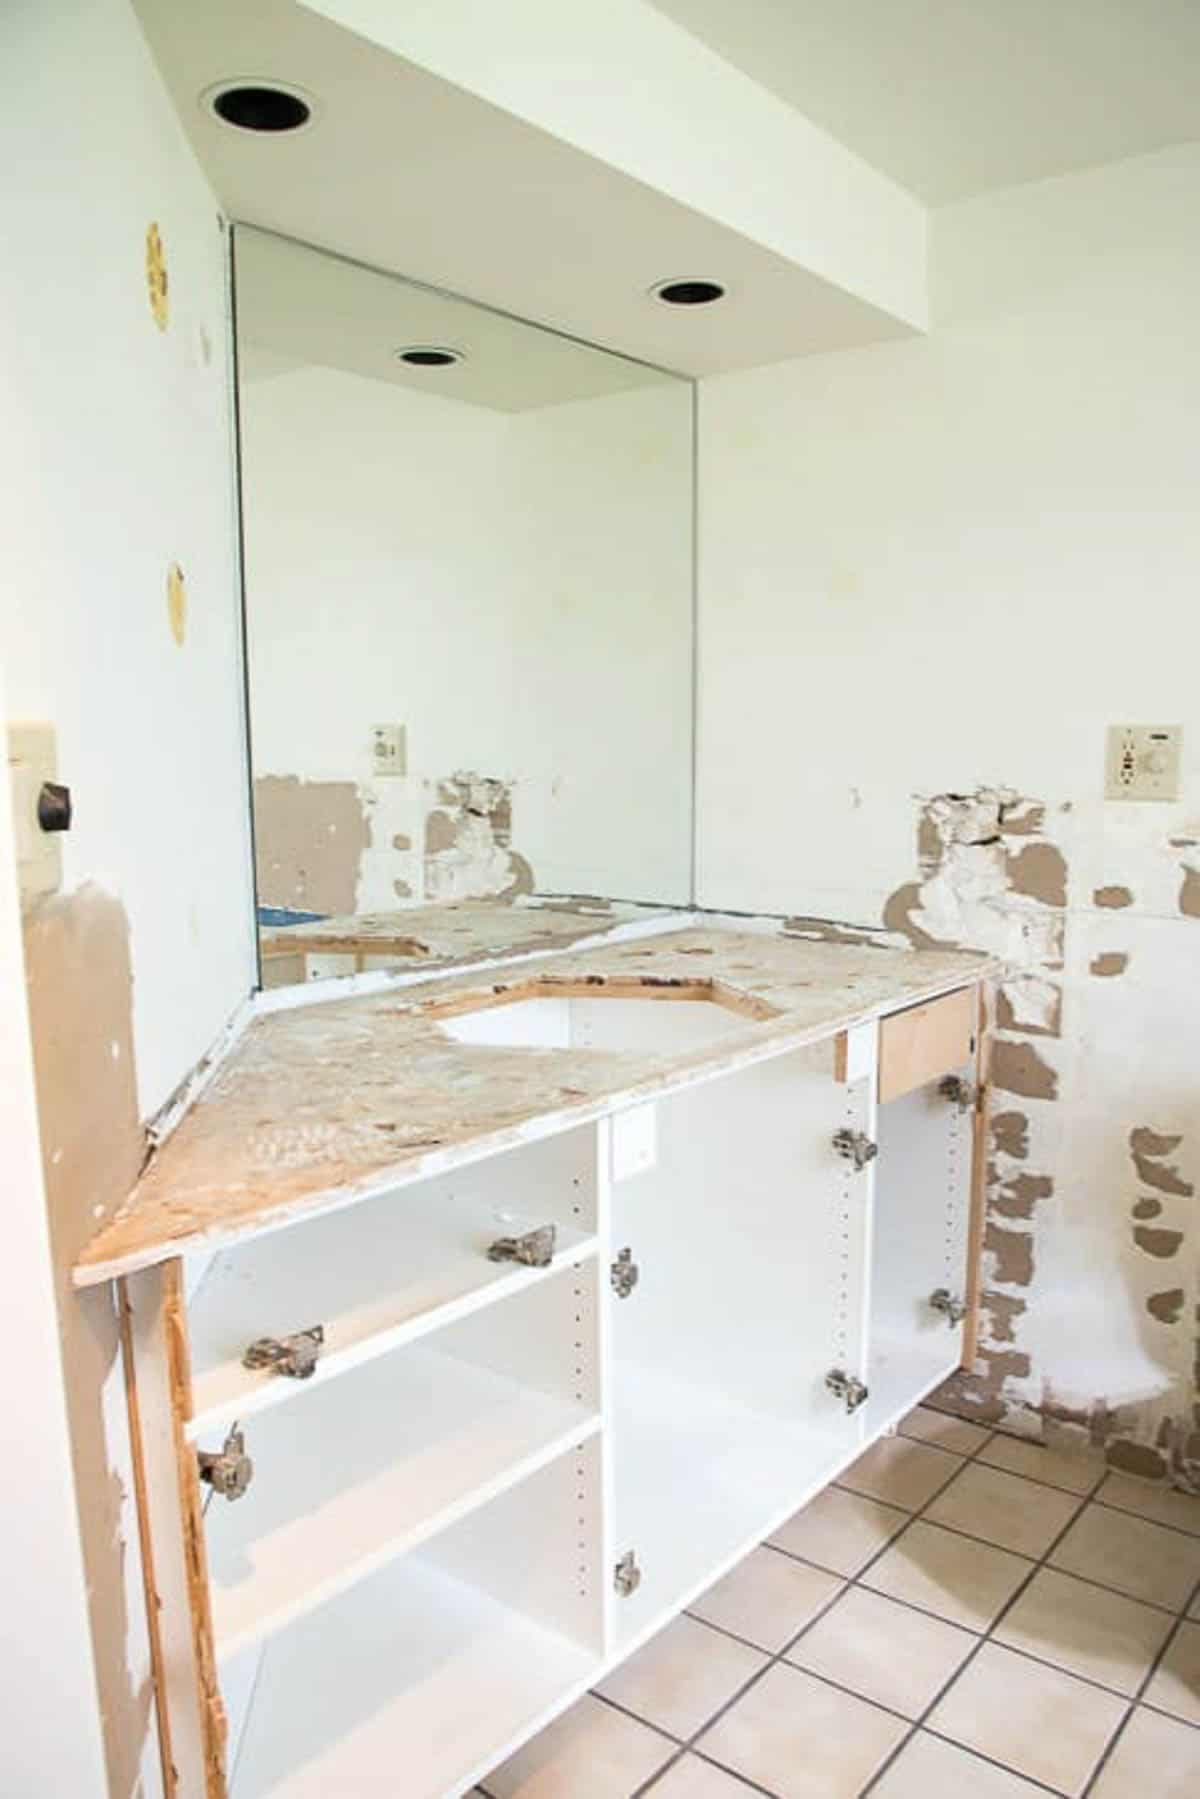 bathroom vanity with tile and doors removed